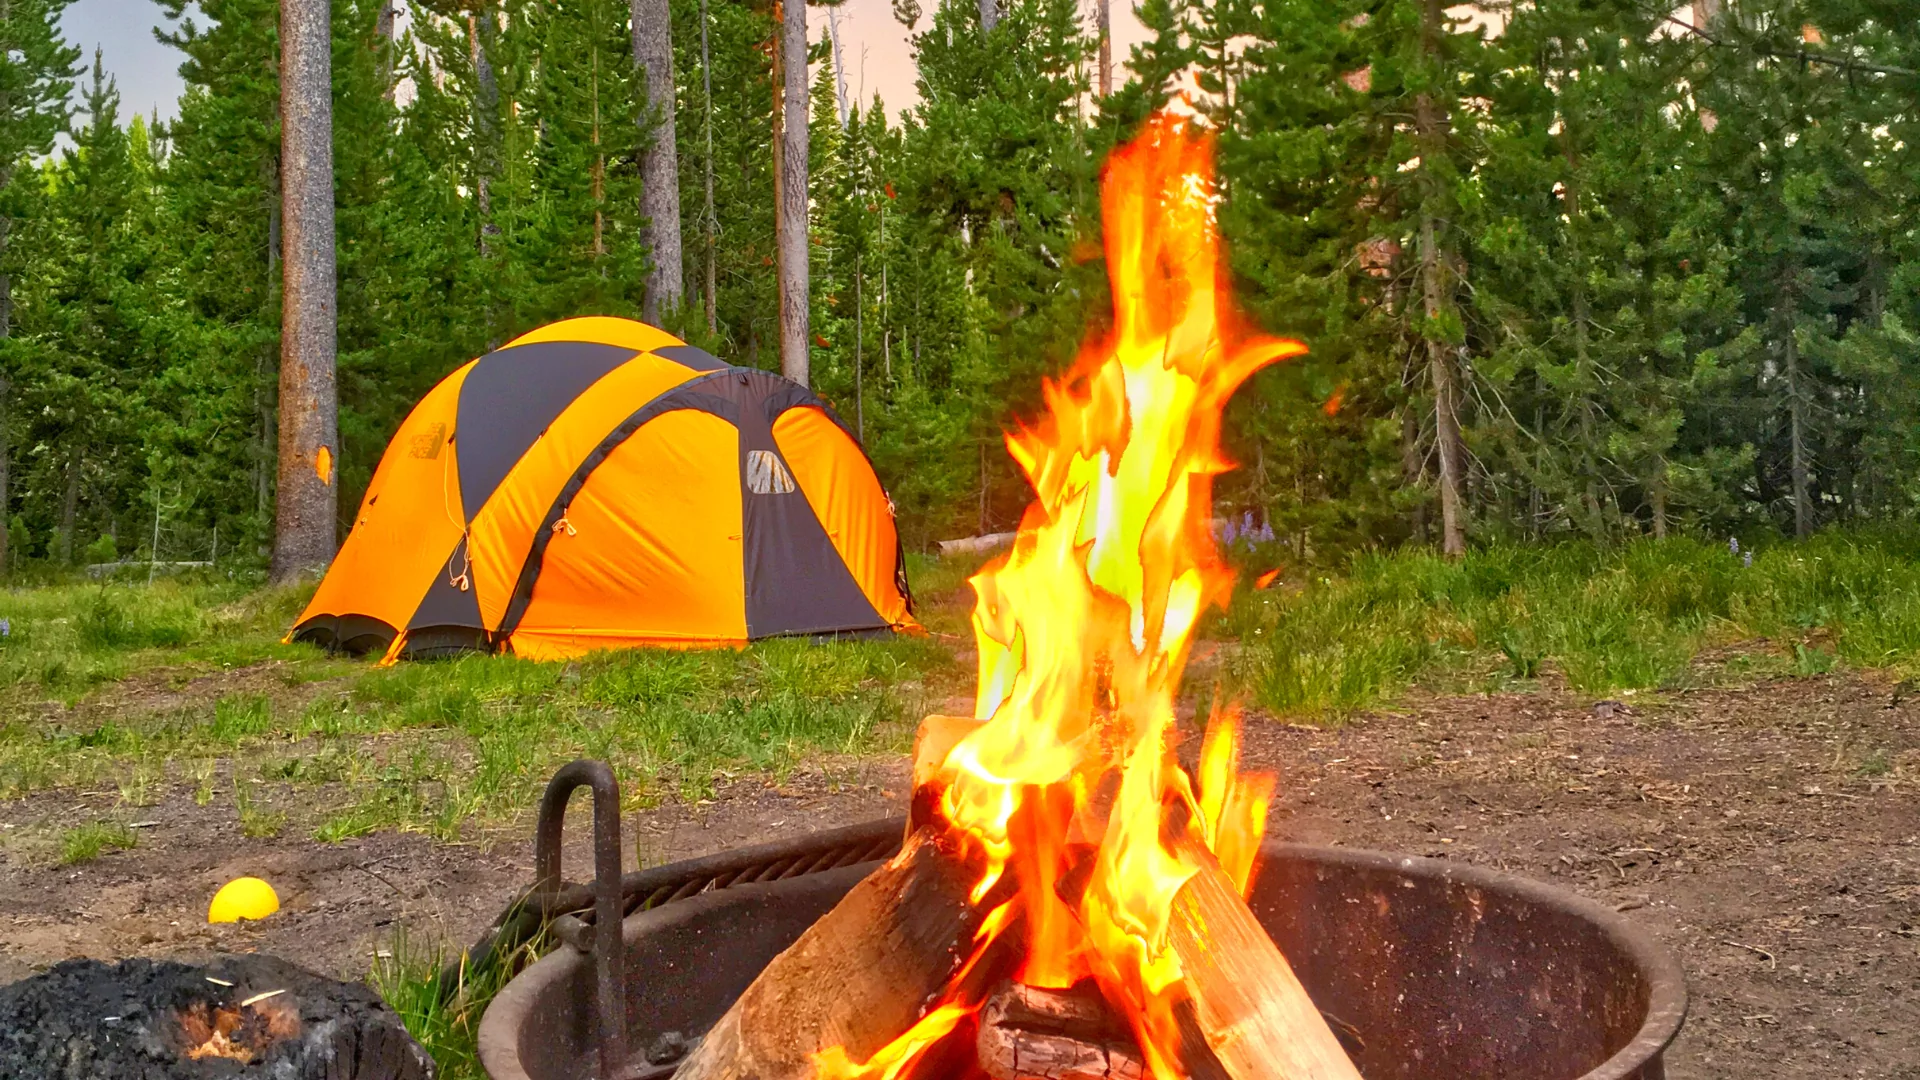 Yellowstone campground with tent and fire pit